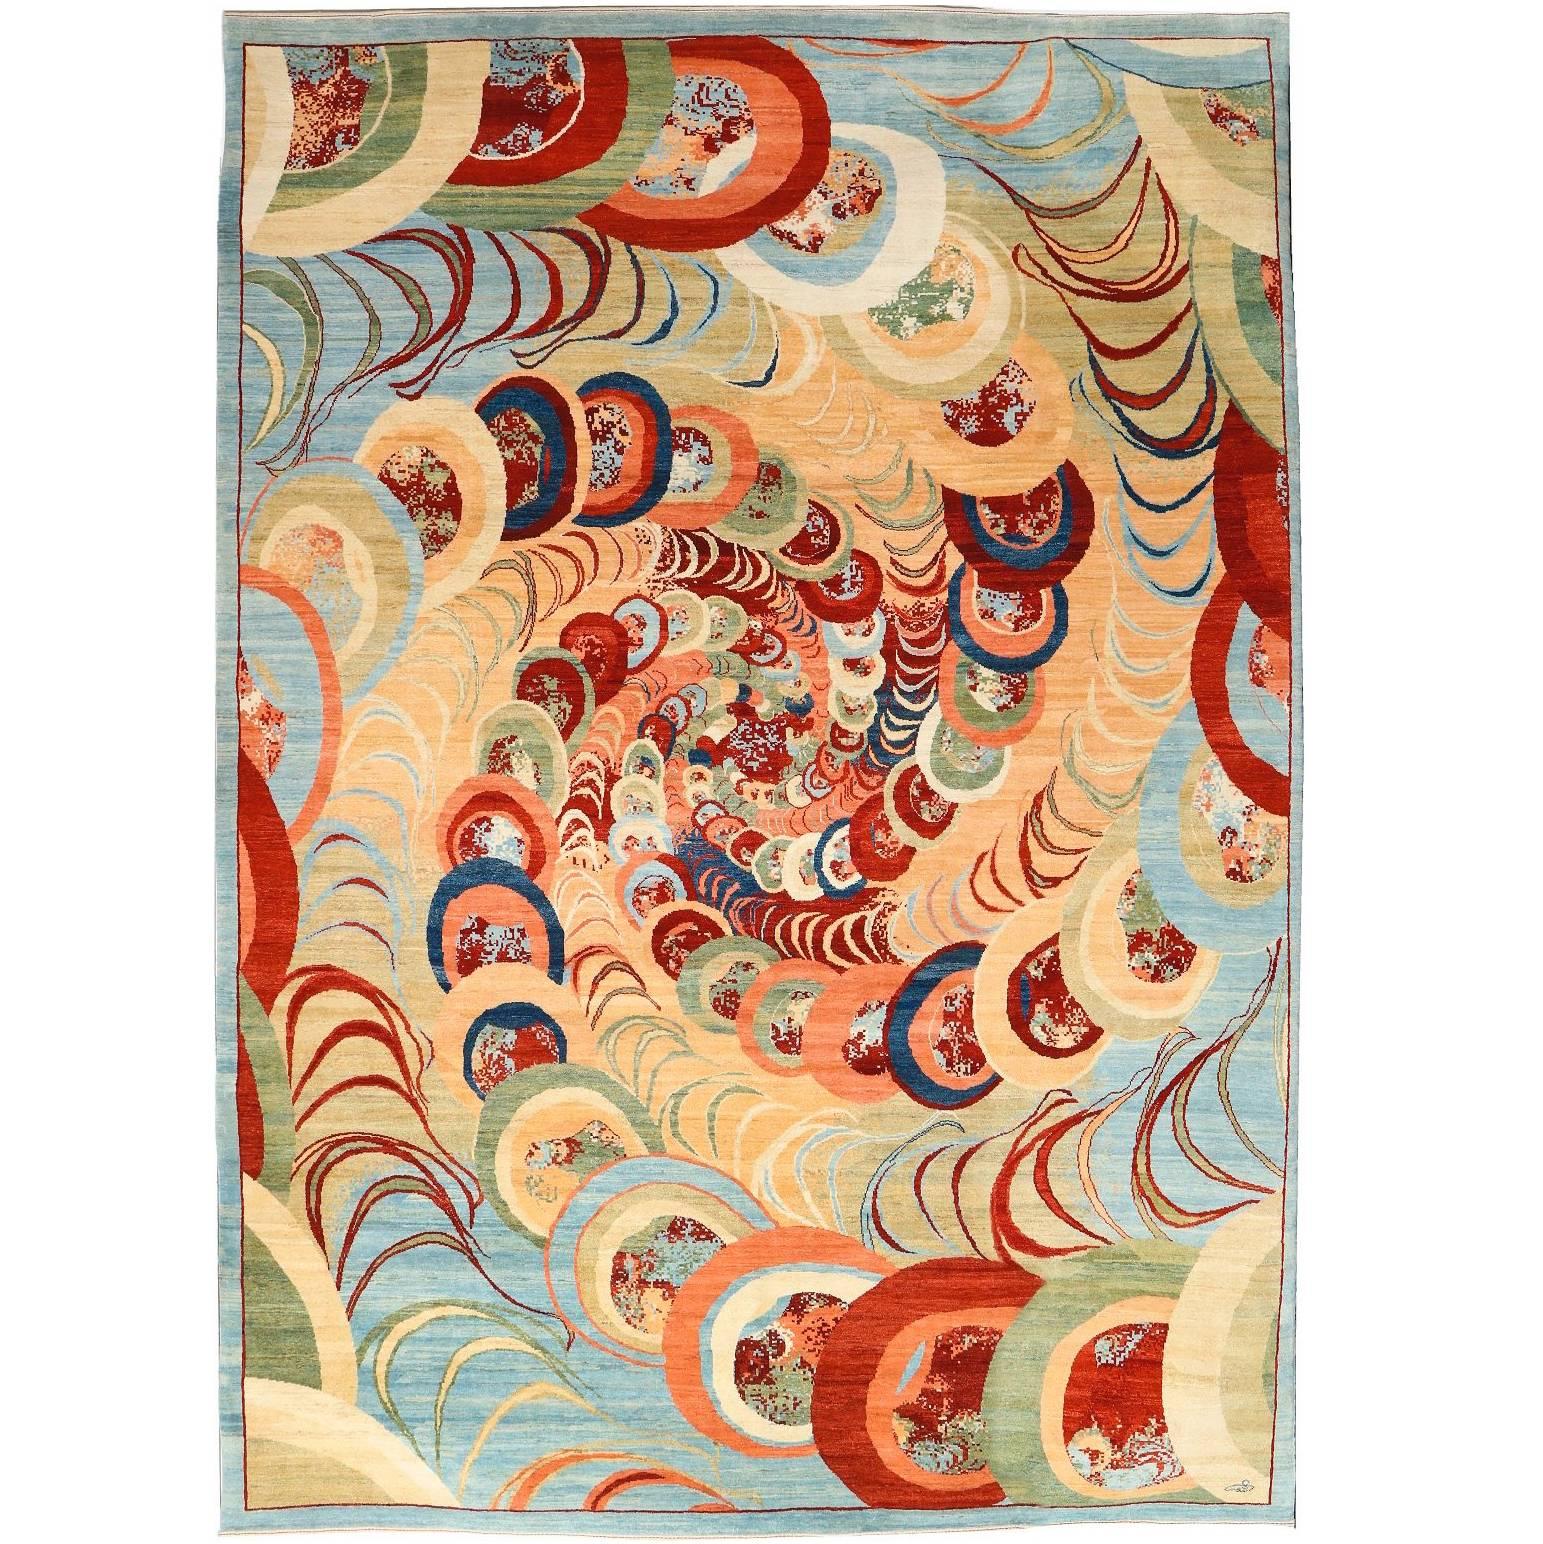 Orley Shabahang "Kaleidoscope" Contemporary Persian Rug, 9' x 12' For Sale